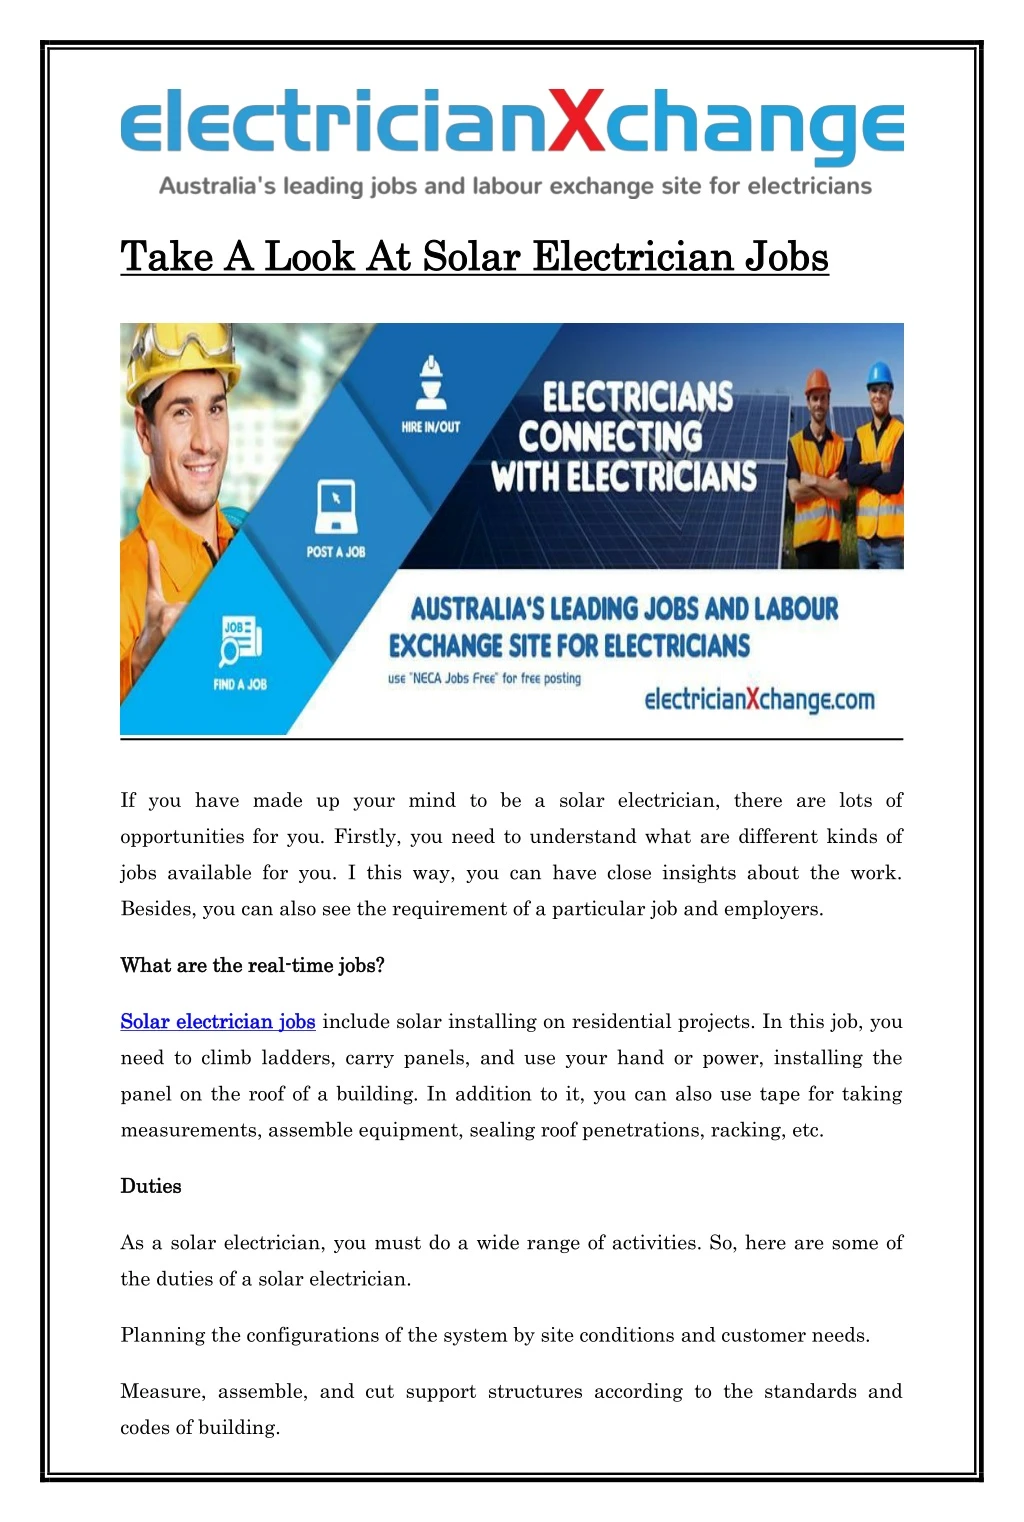 take a look at solar electrician jobs take a look